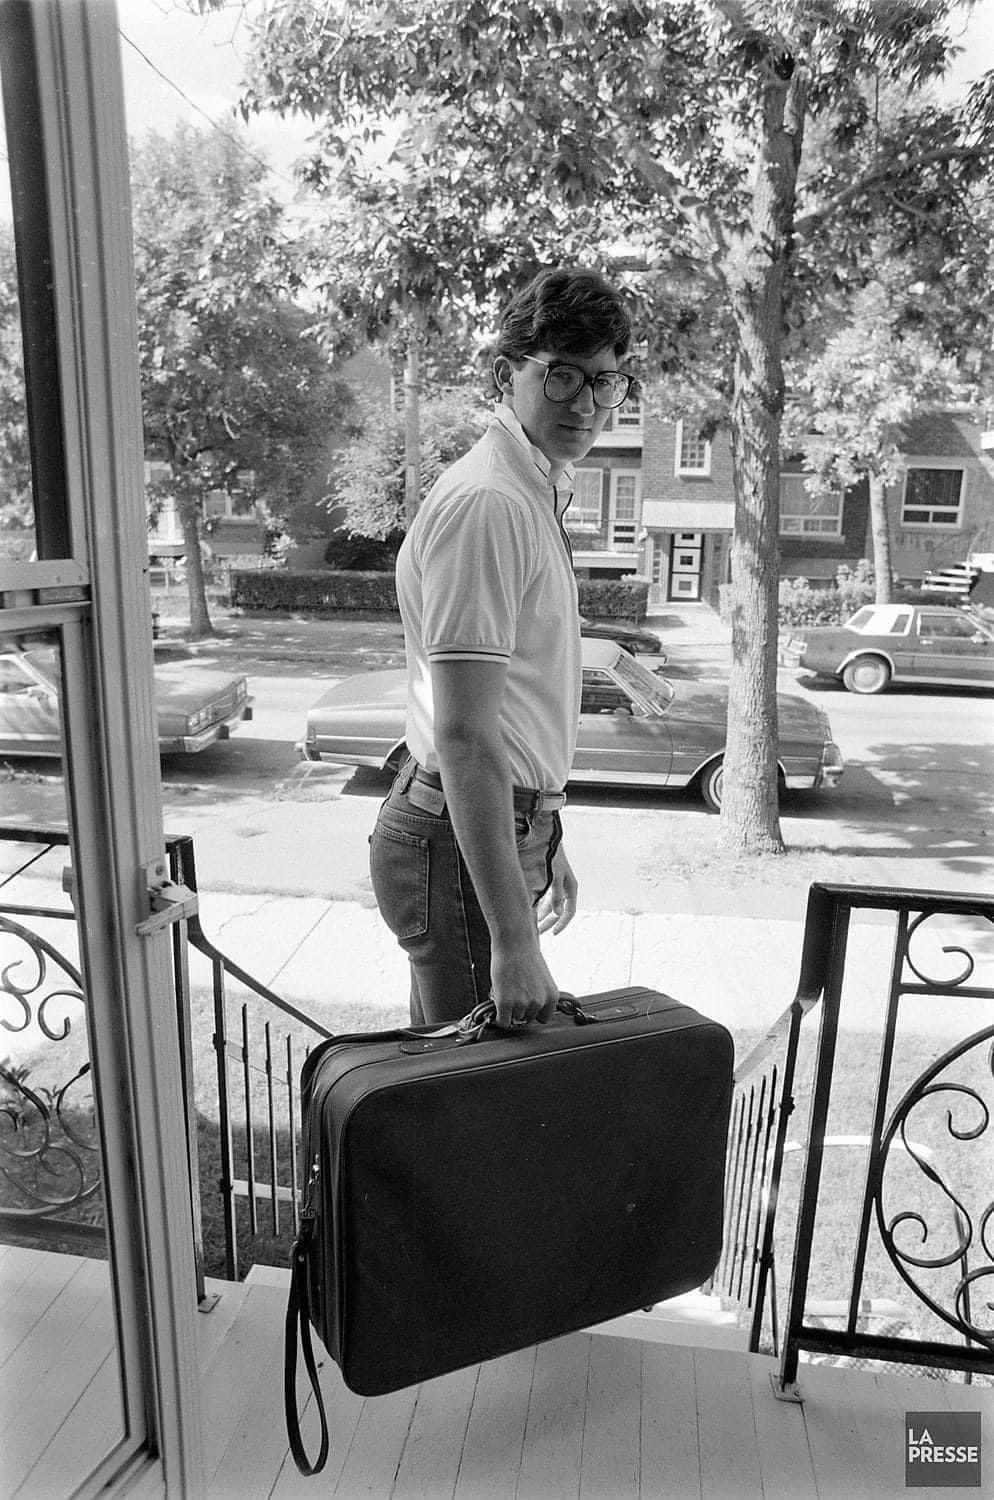 19-year old Mario Lemieux leaving his home to report to the Pittsburgh Penguins hockey team in 1984.